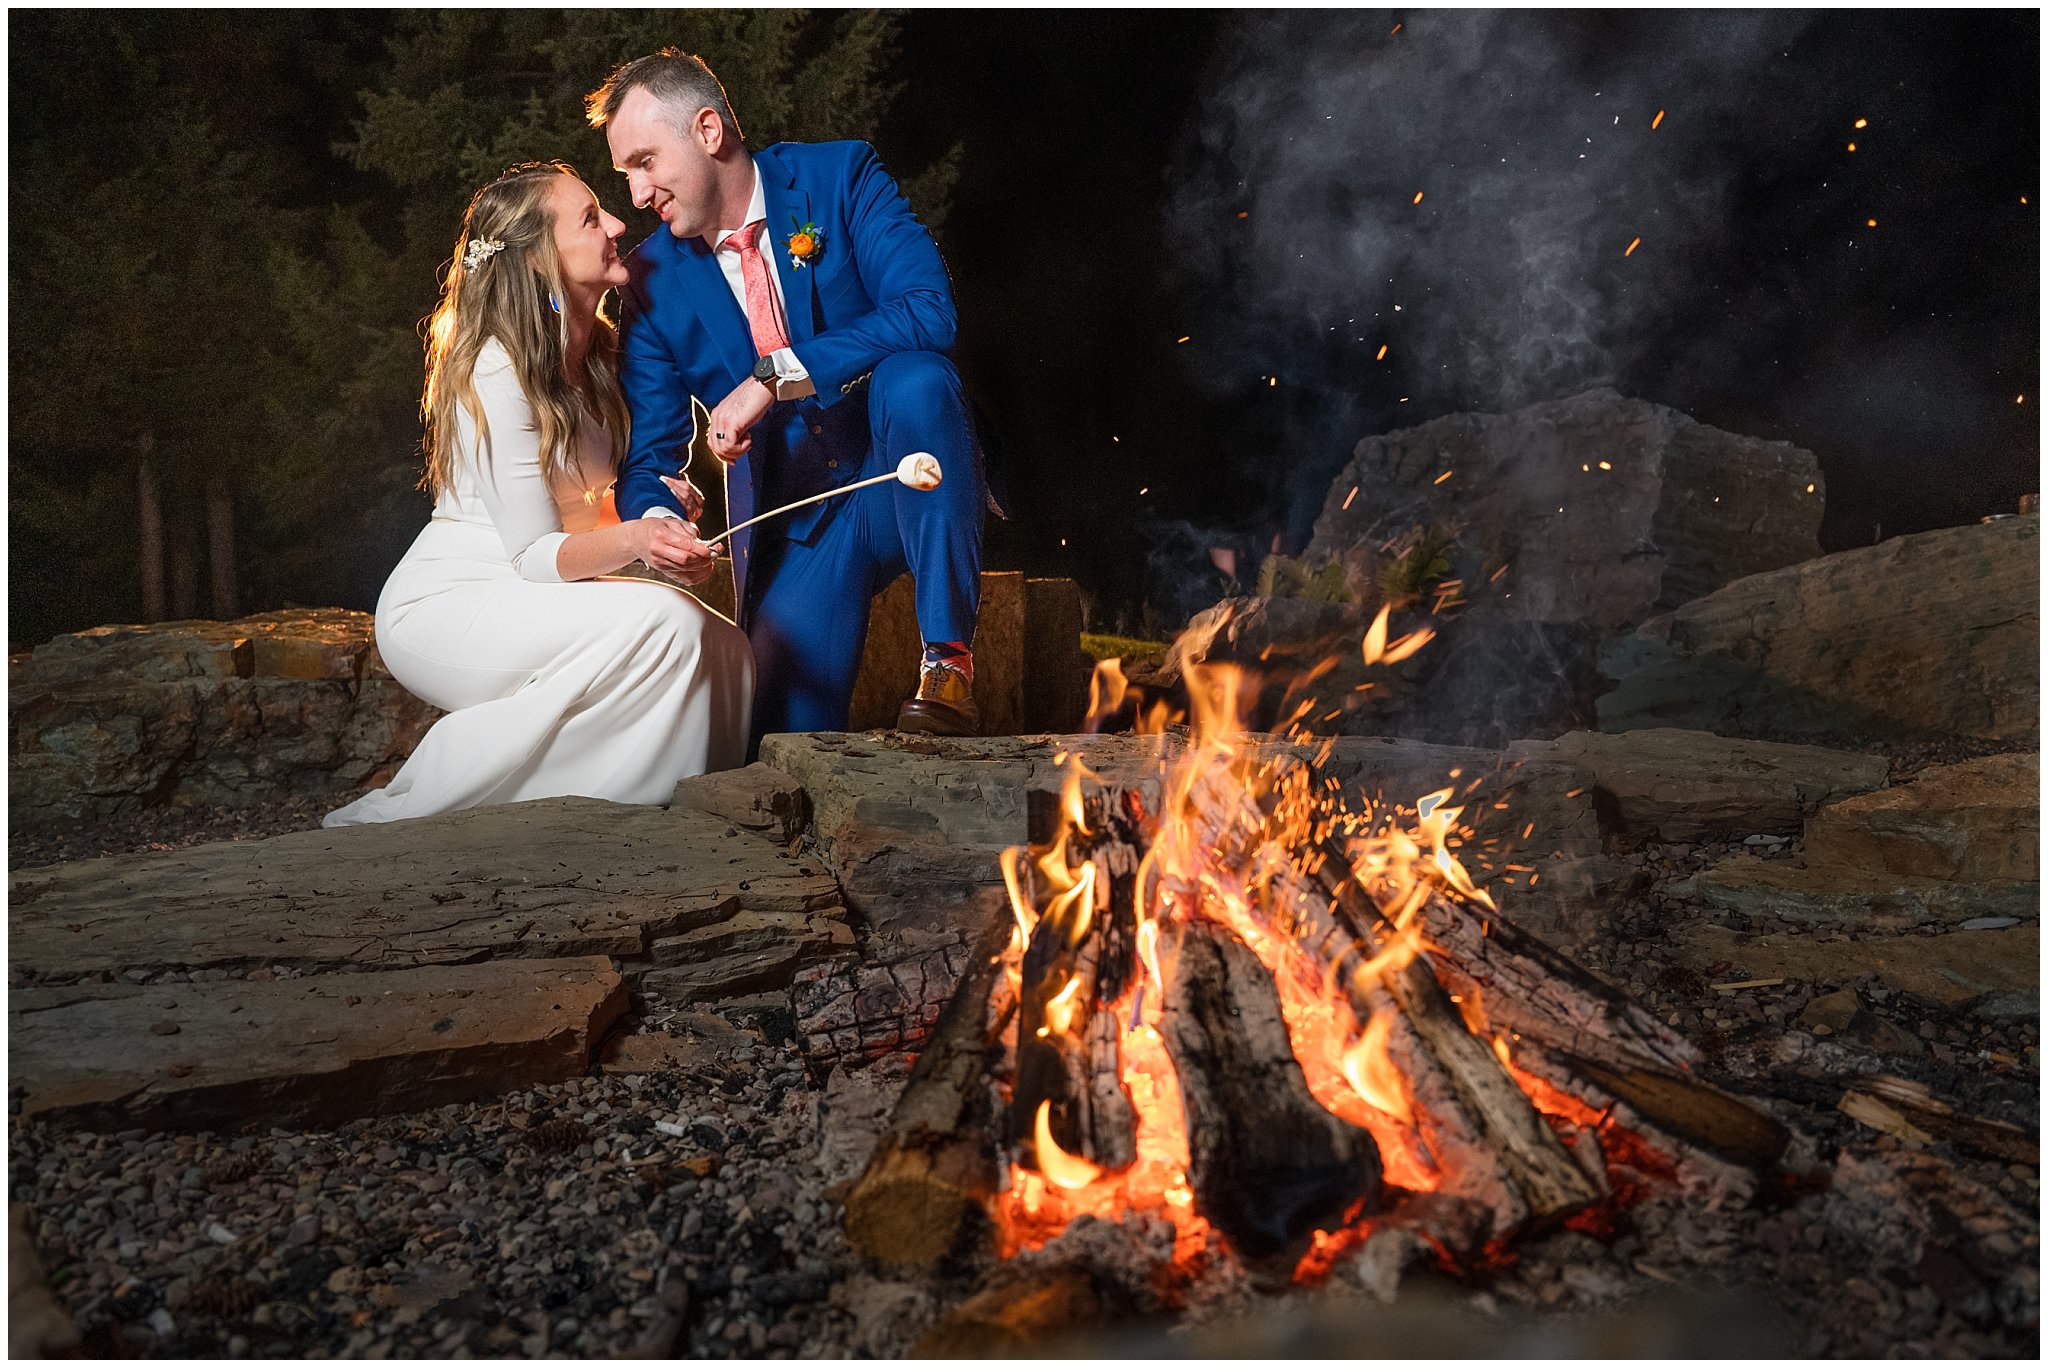 Bride and groom roasting smores around fire during wedding in the Montana forest | Mountainside Weddings Kalispell Montana Destination Wedding | Jessie and Dallin Photography